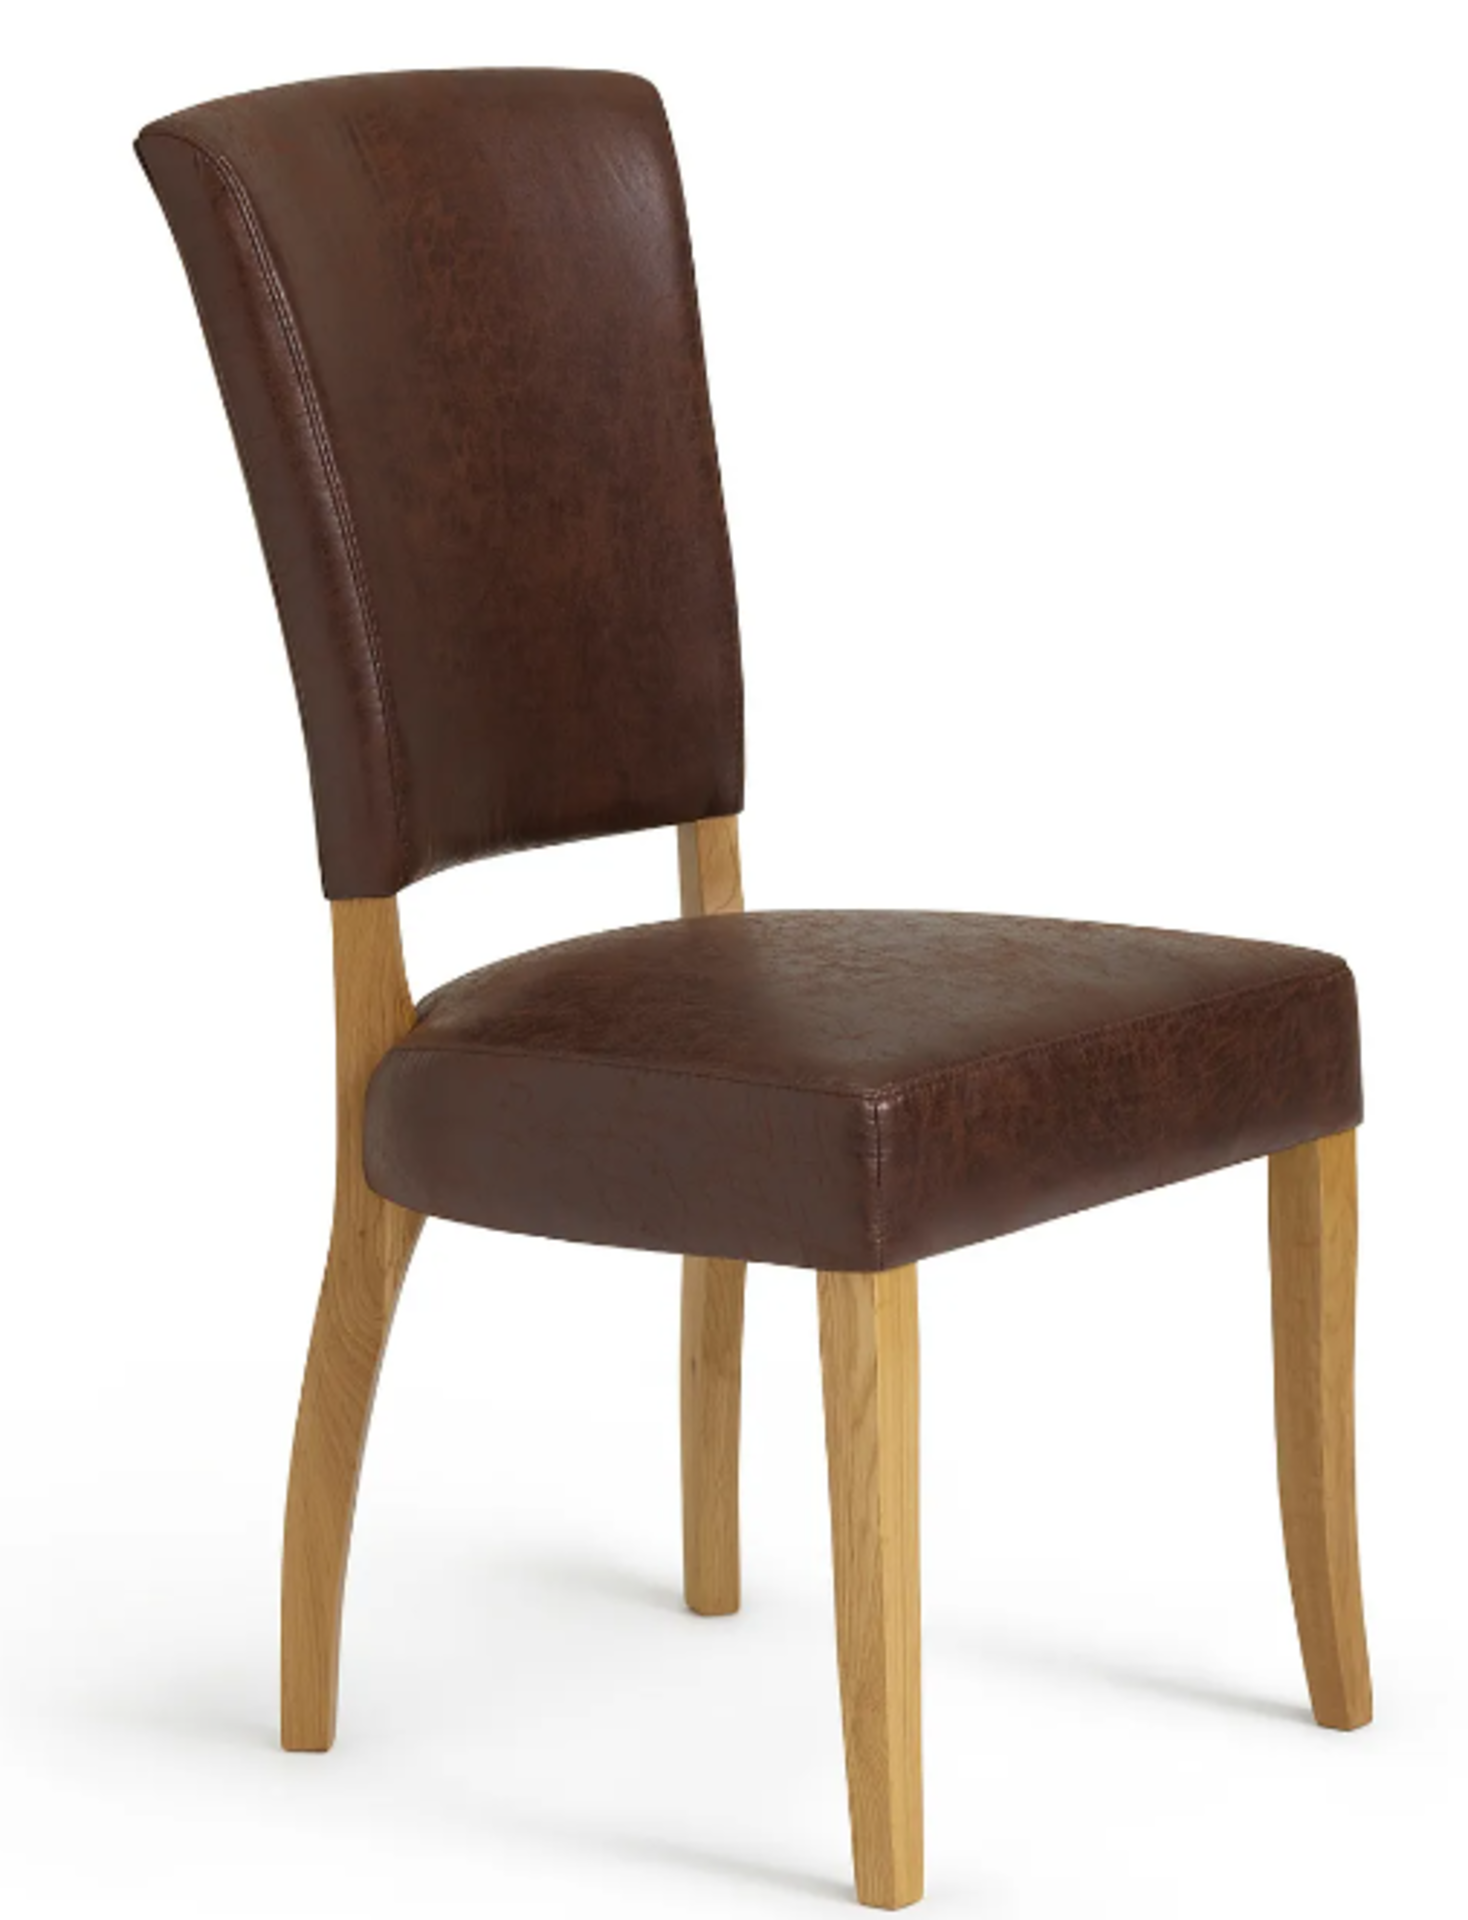 Pair of CURVE BACK NATURAL/RUSTIC Brown Antiqued Fabric Dining Chair. RRP £210.00. This dining chair